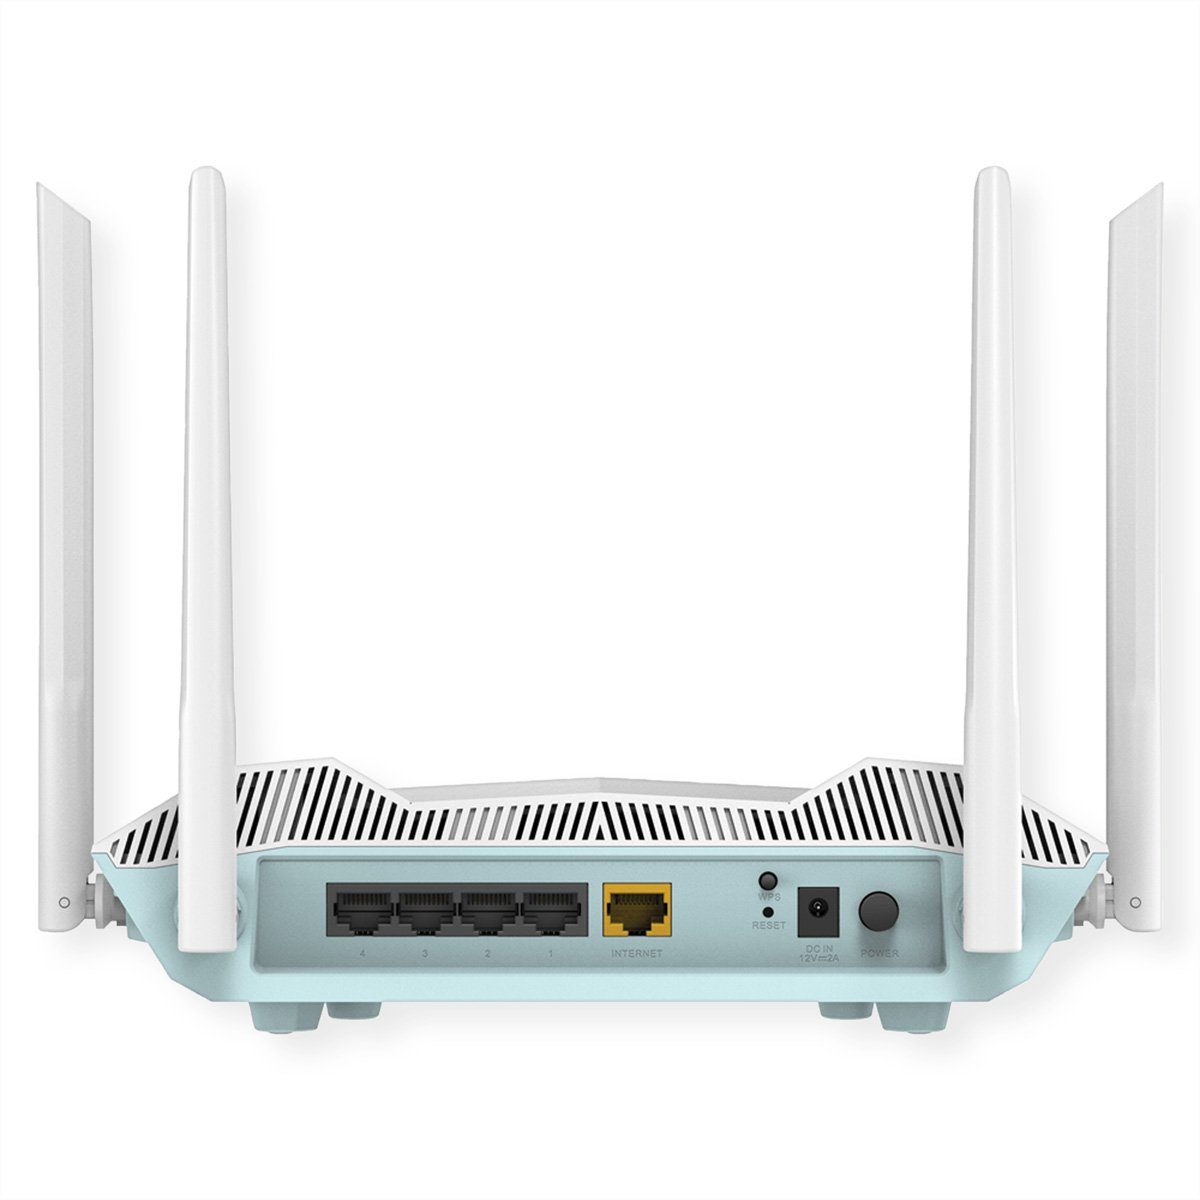 Smart 6, EaglePro WiFi MU-MIMO AX3200, WLAN-Router, R32/E AI, Router D-Link